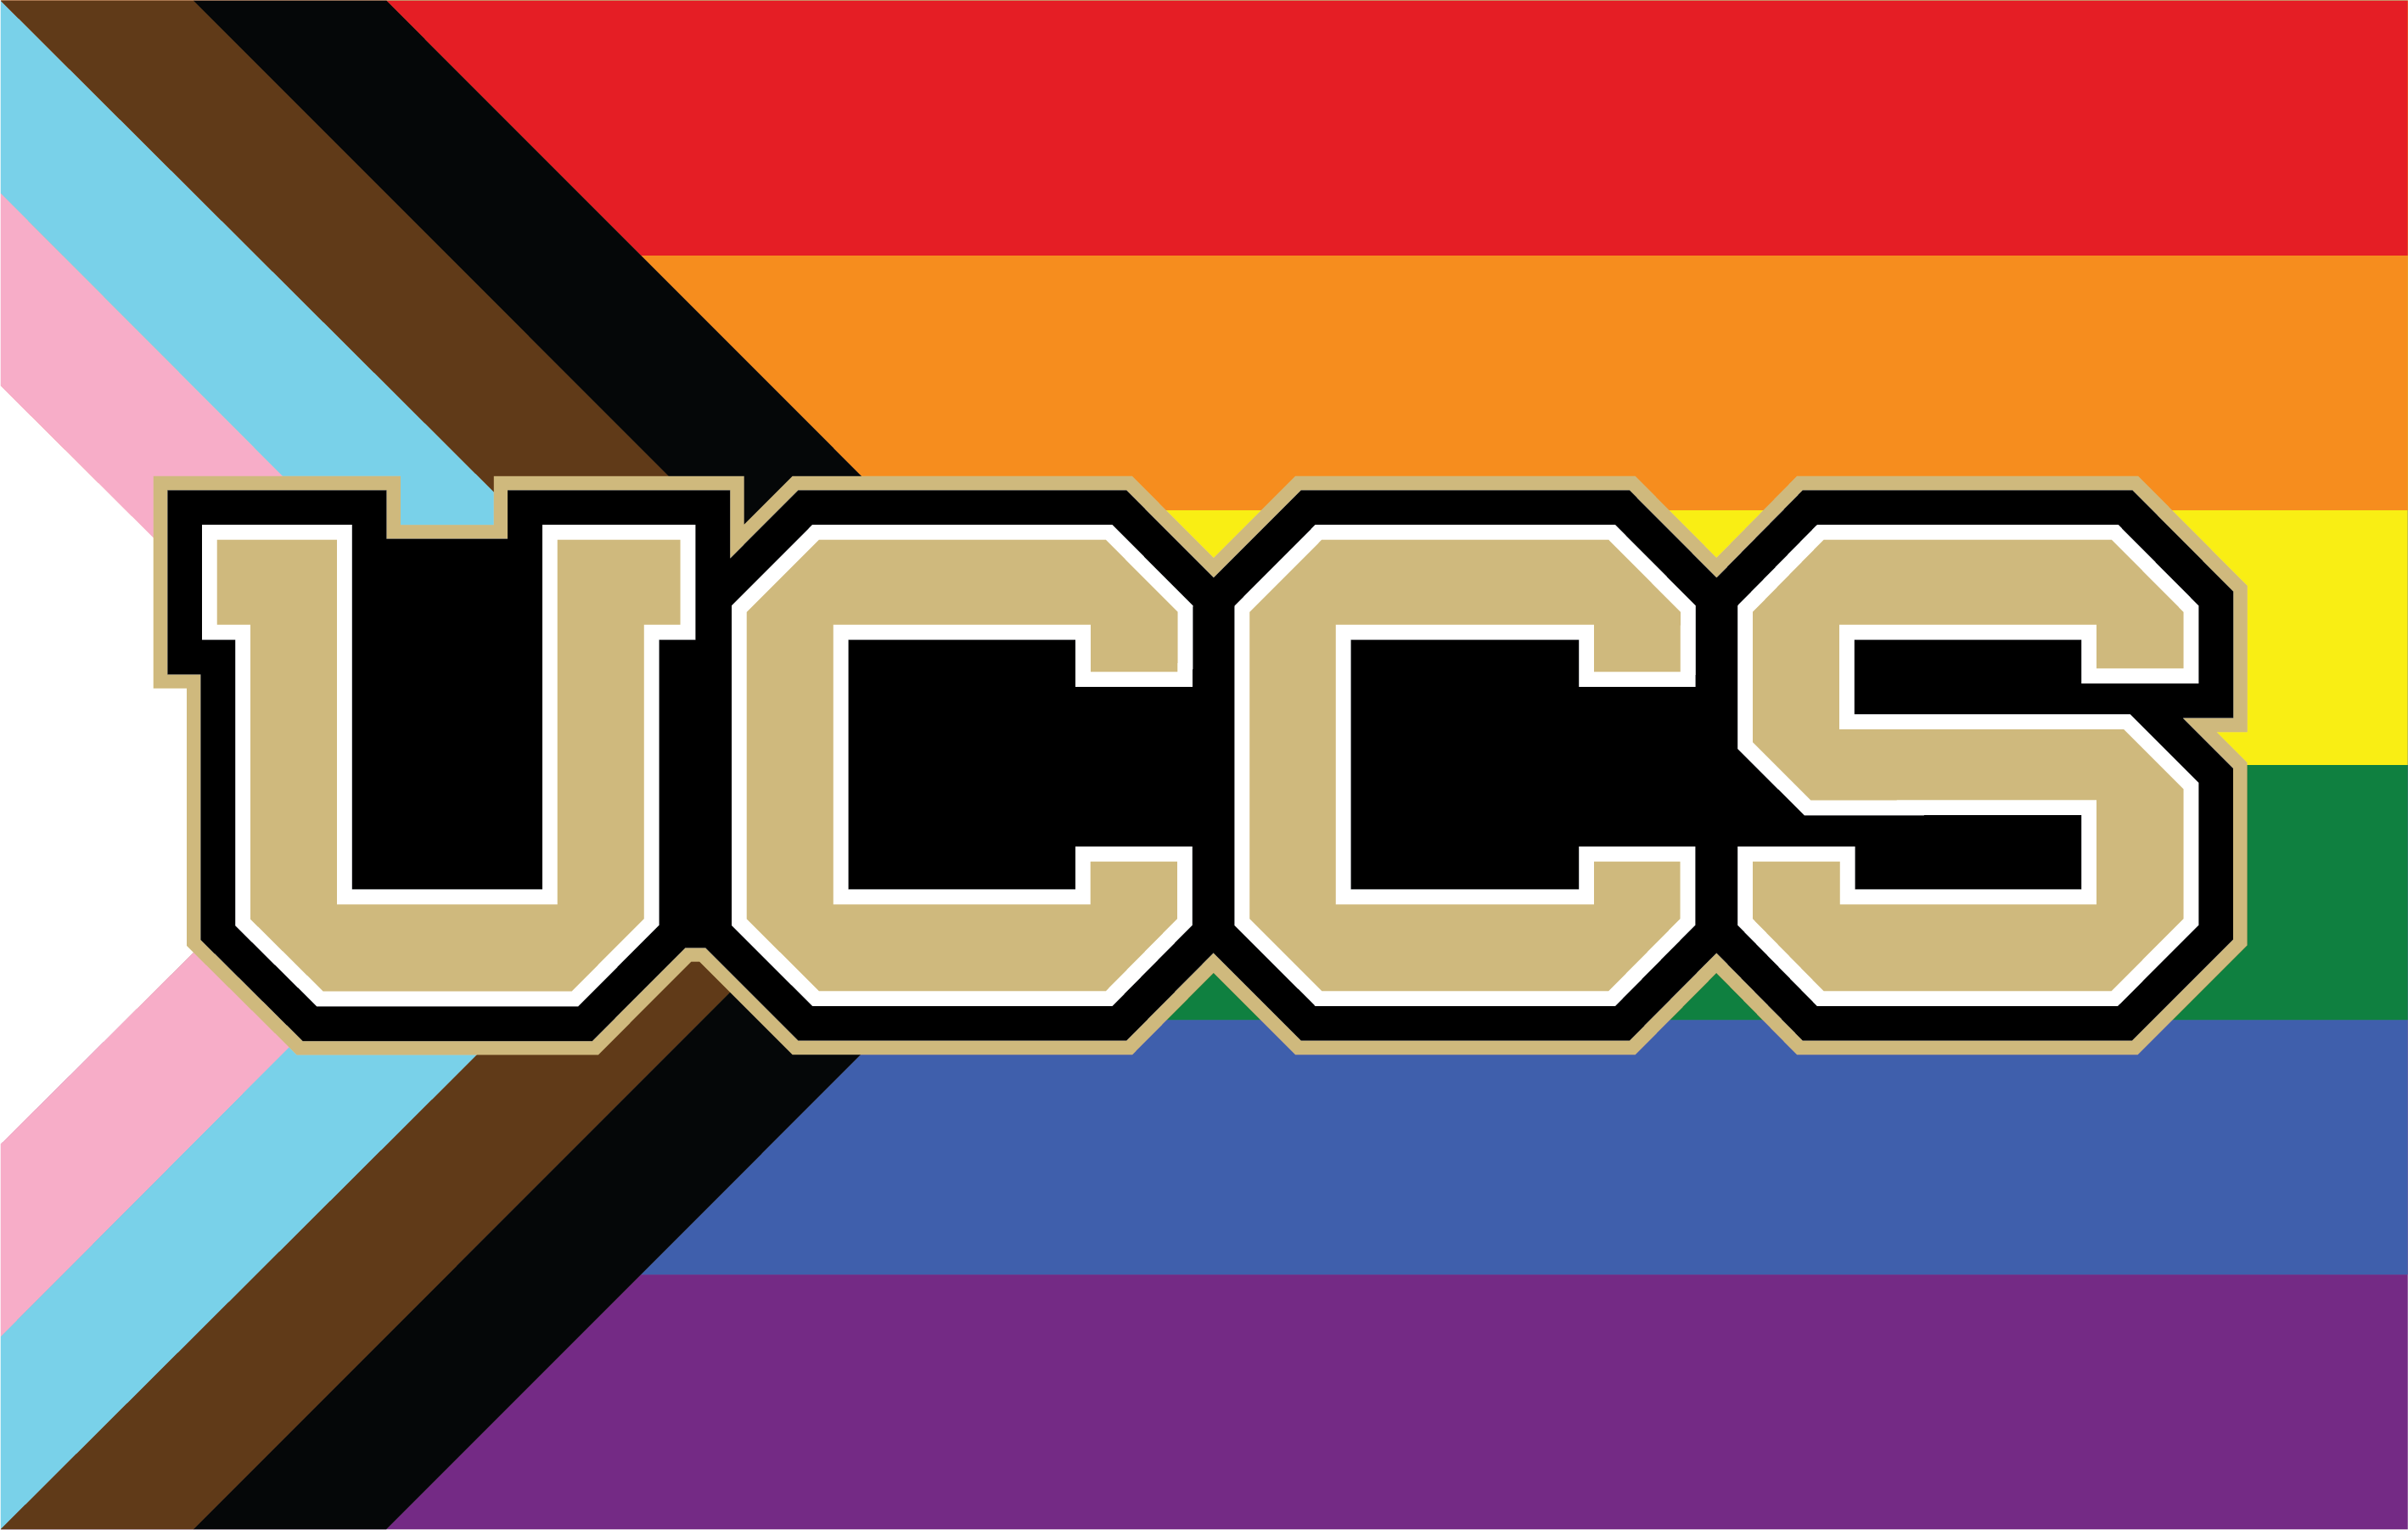 A rainbow flag superimposed with the UCCS acronym